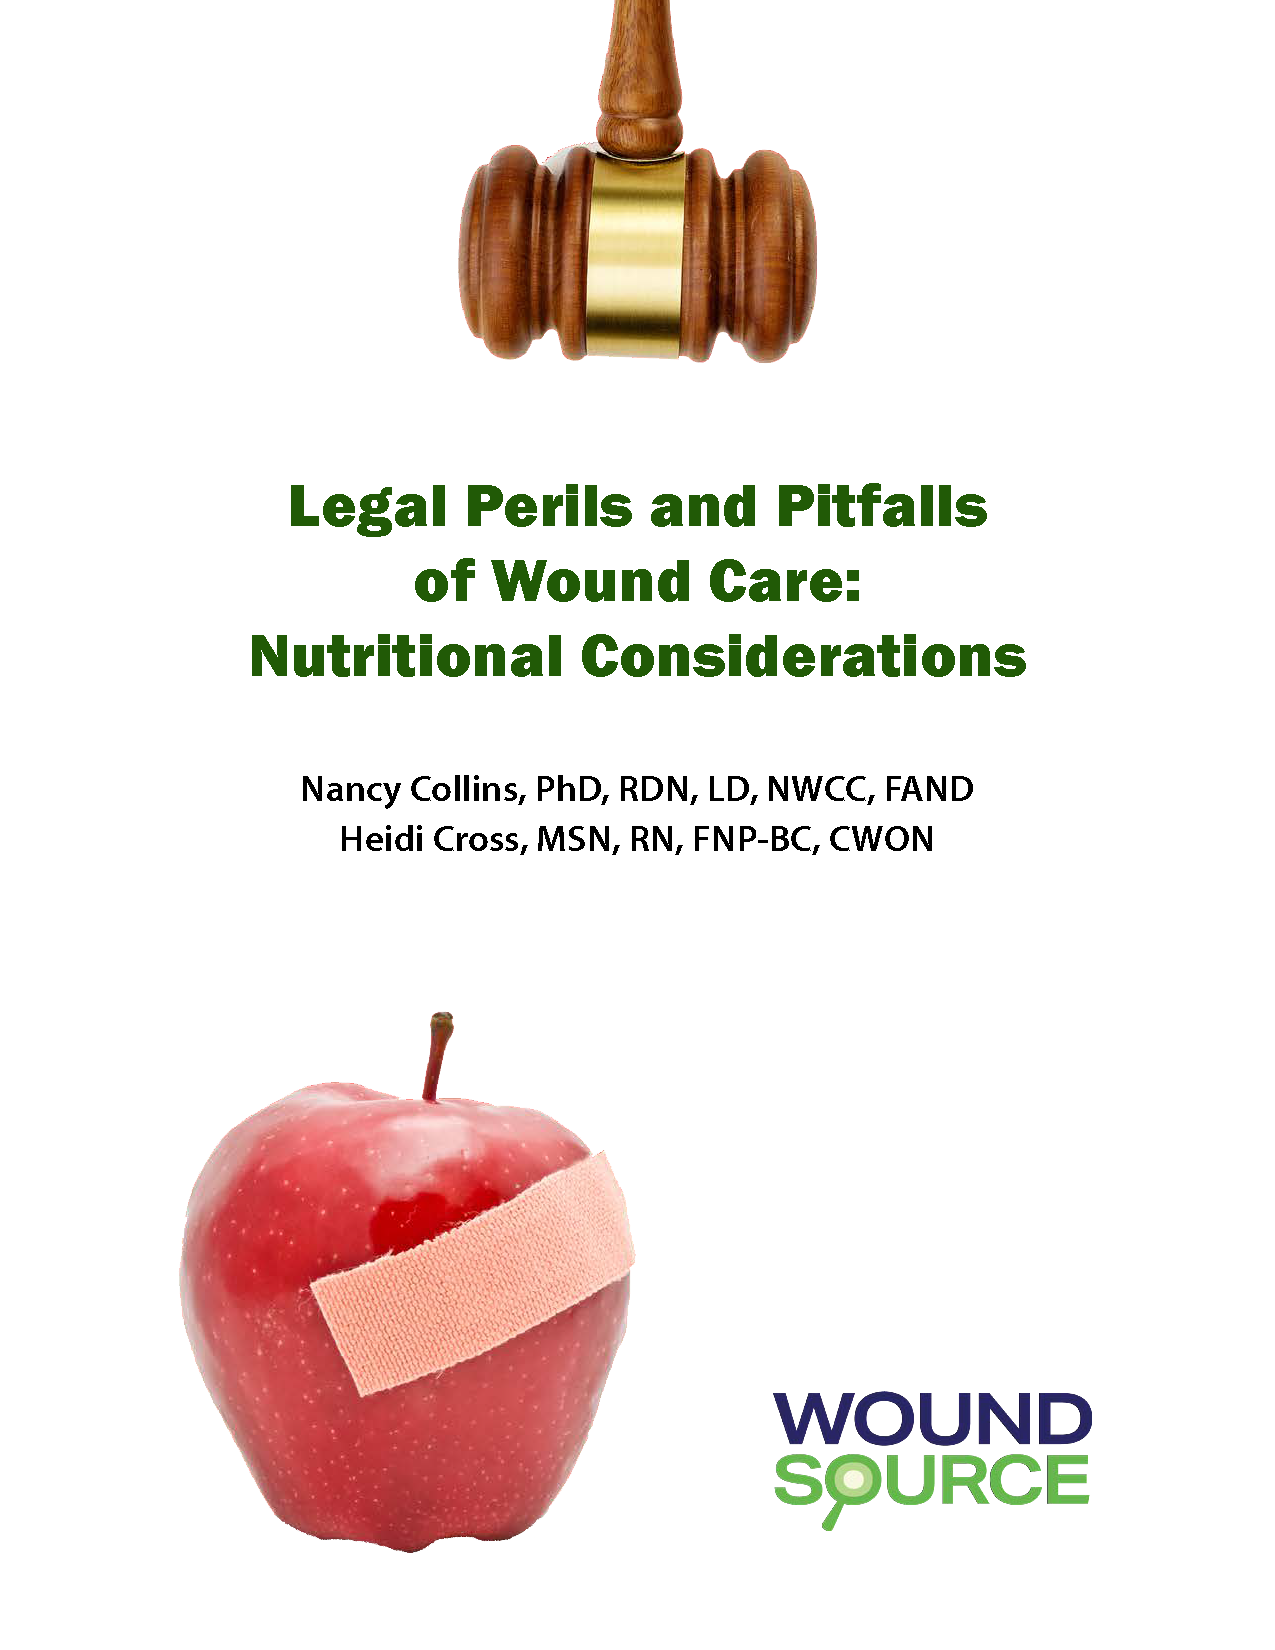 Legal Perils and Pitfalls of Wound Care: Nutritional Considerations